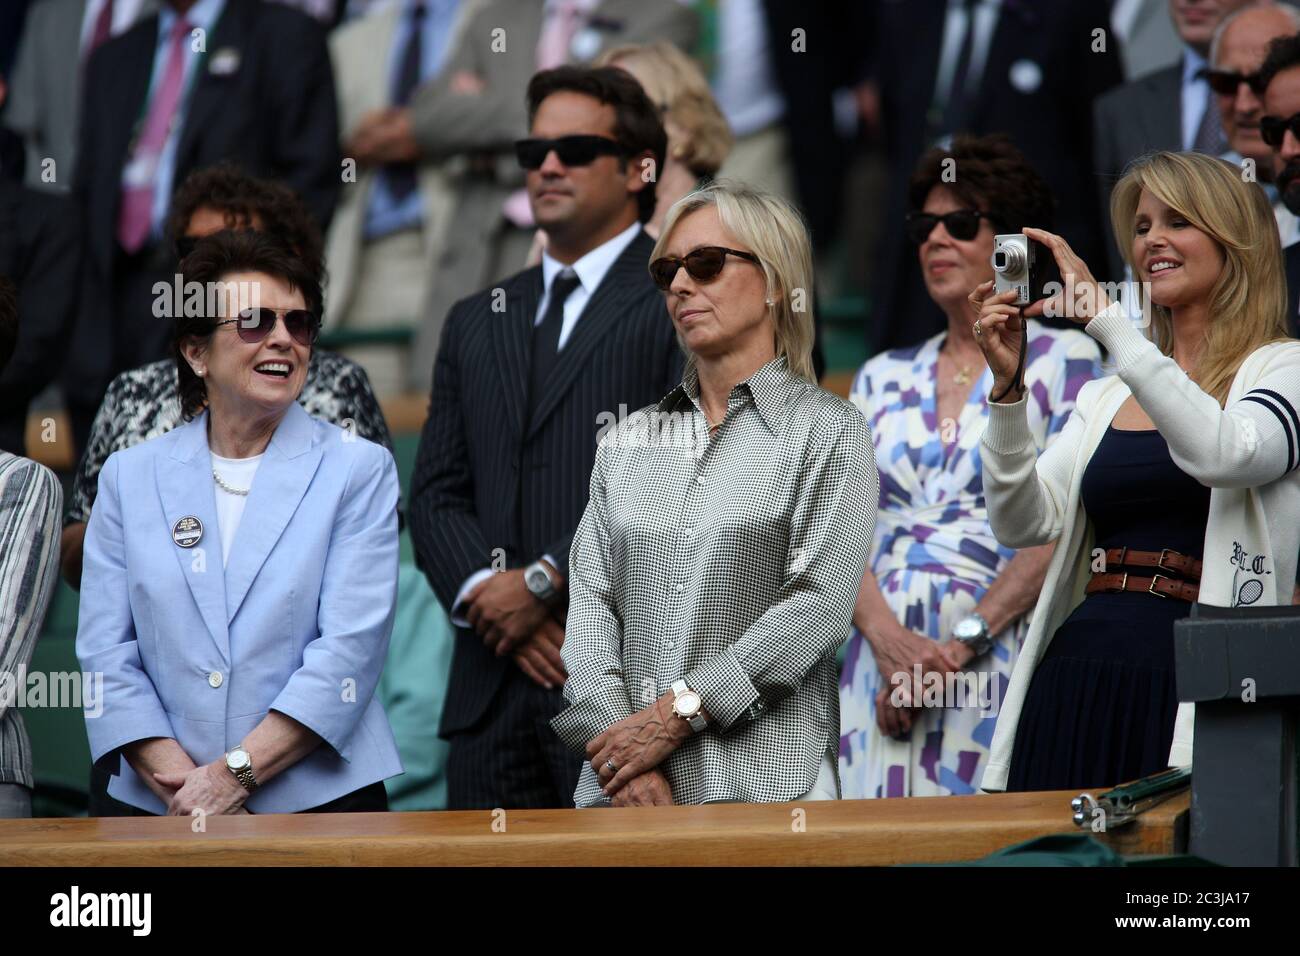 Christie Brinkley snaps a photo while standing alongside tennis greats Martina Navratilova and Billie Jean King after the 2010 women's final at Wimbledon which was won by Serena Williams. Stock Photo